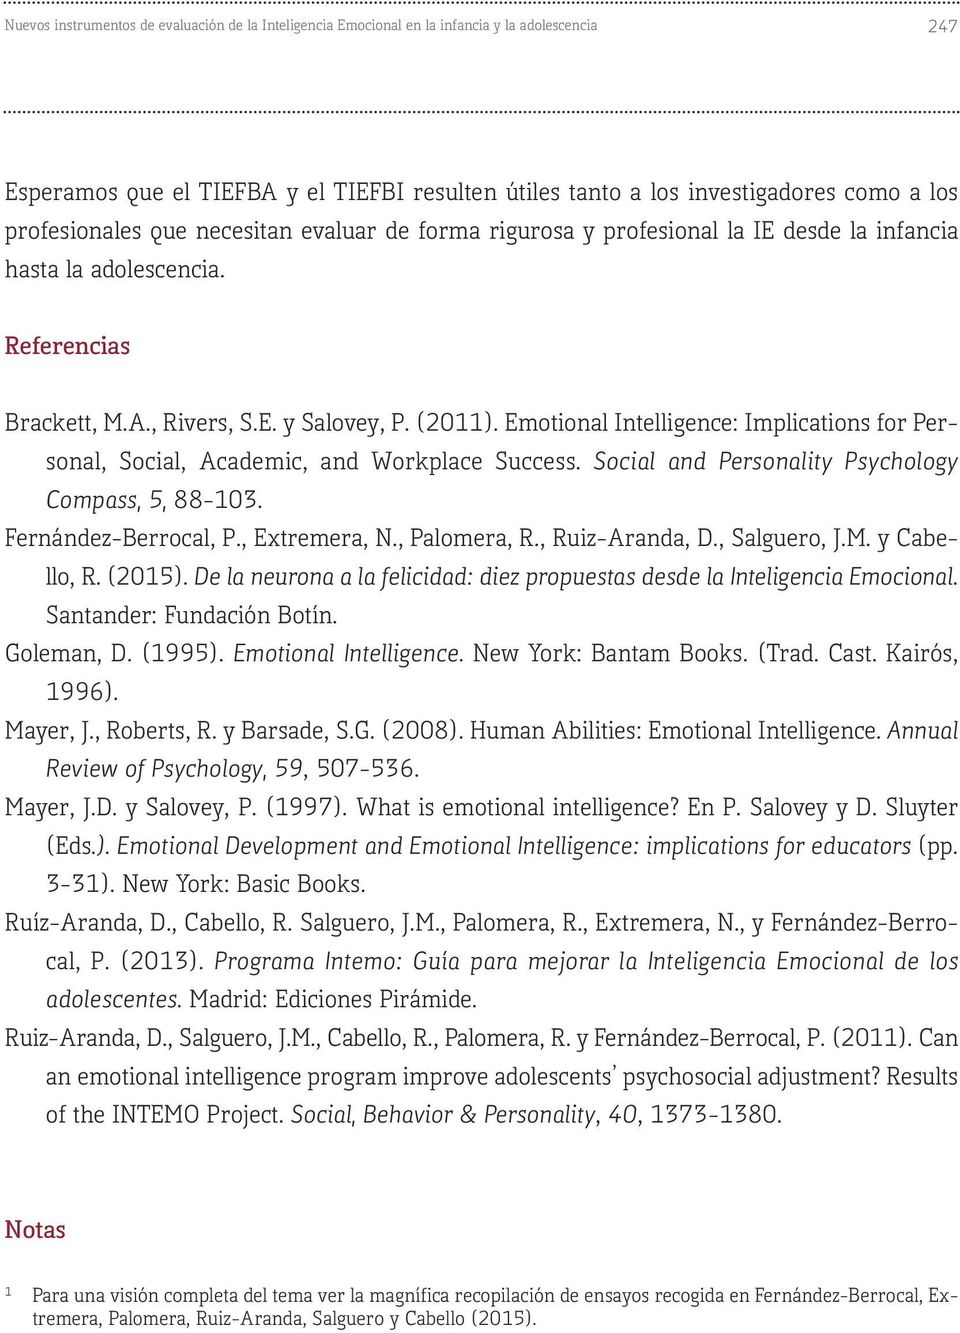 Emotional Intelligence: Implications for Personal, Social, Academic, and Workplace Success. Social and Personality Psychology Compass, 5, 88-103. Fernández-Berrocal, P., Extremera, N., Palomera, R.